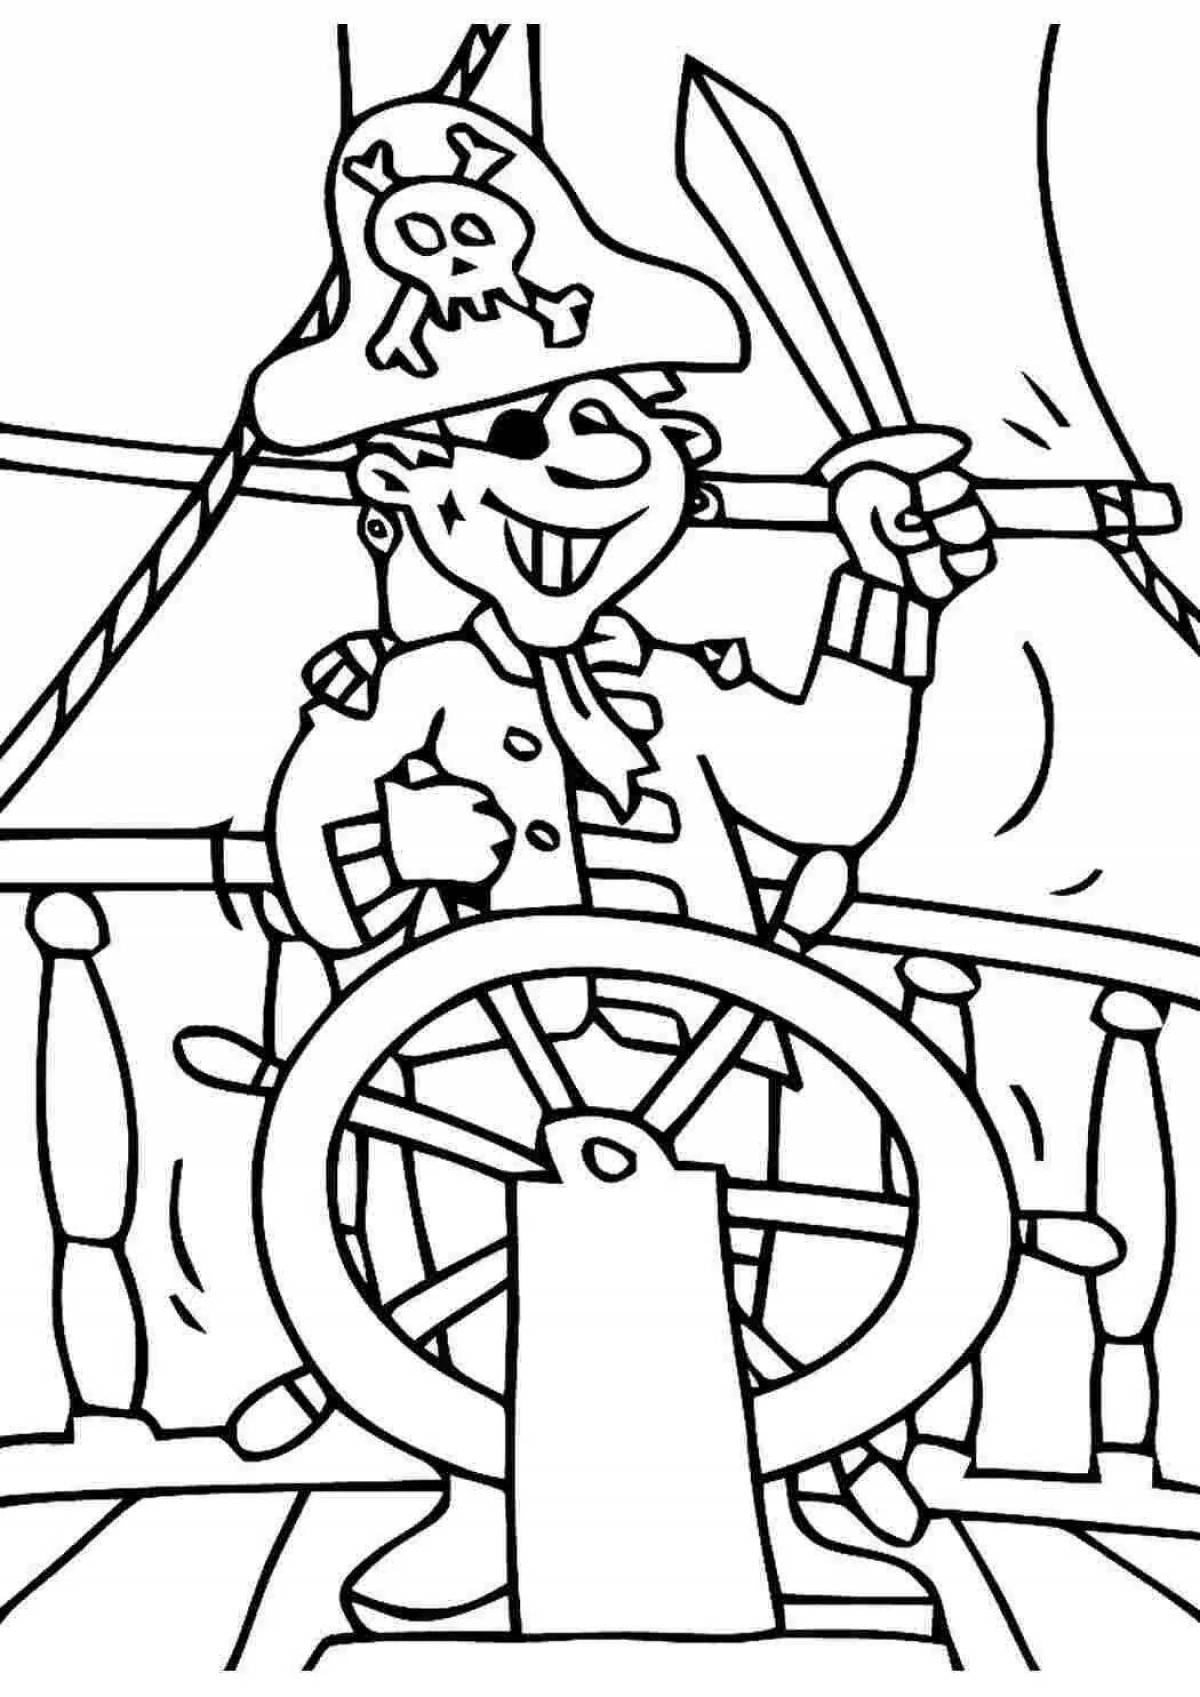 Glorious pirate ship coloring pages for kids